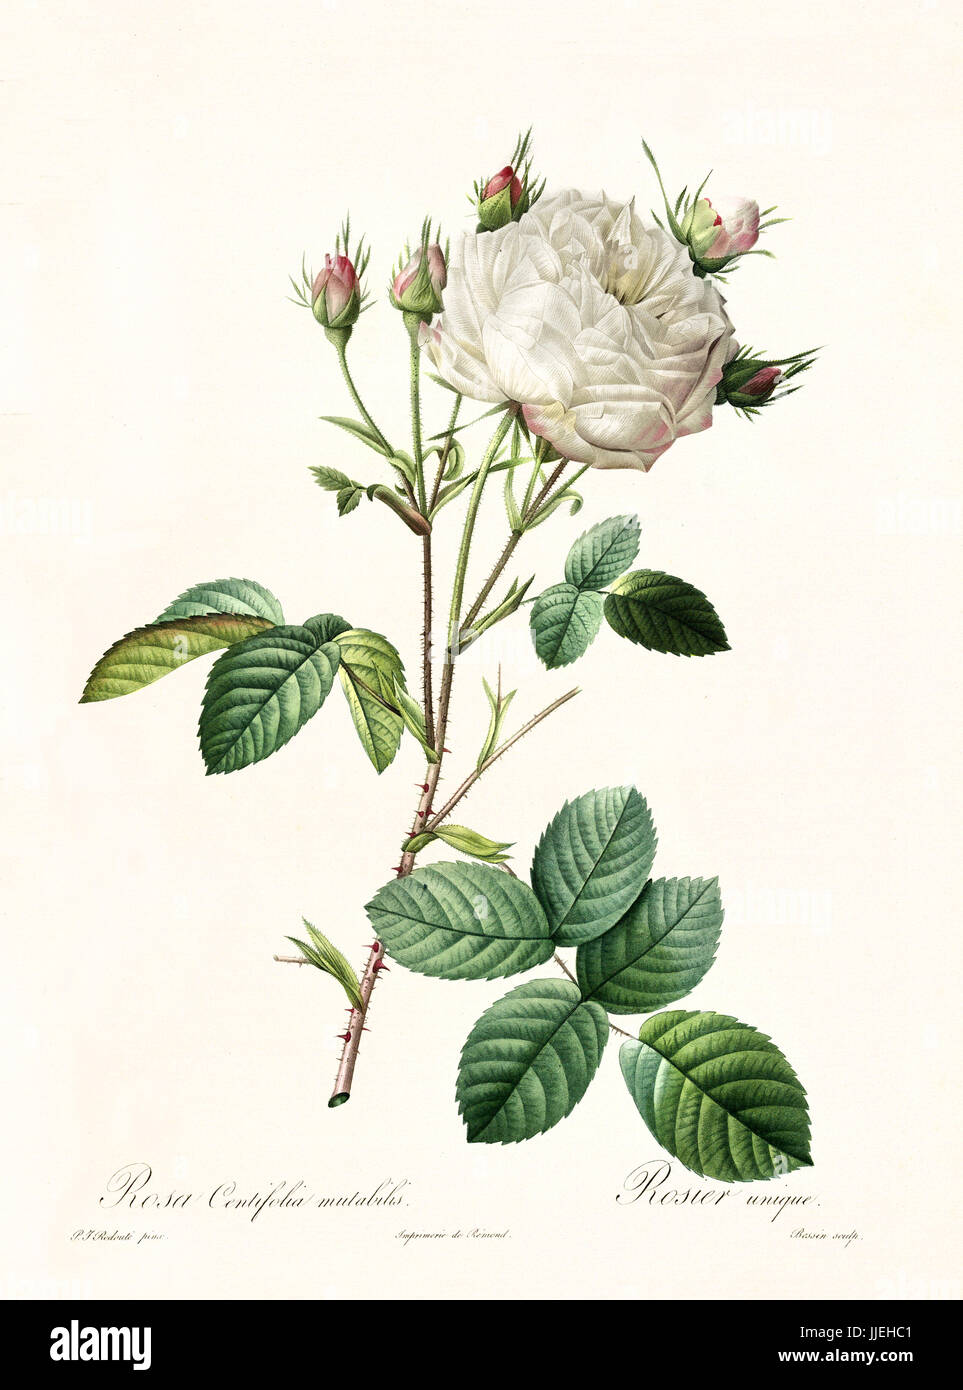 Old illustration of Rosa centifolia mutabilis. Created by P. R. Redoute, published on Les Roses, Imp. Firmin Didot, Paris, 1817-24 Stock Photo